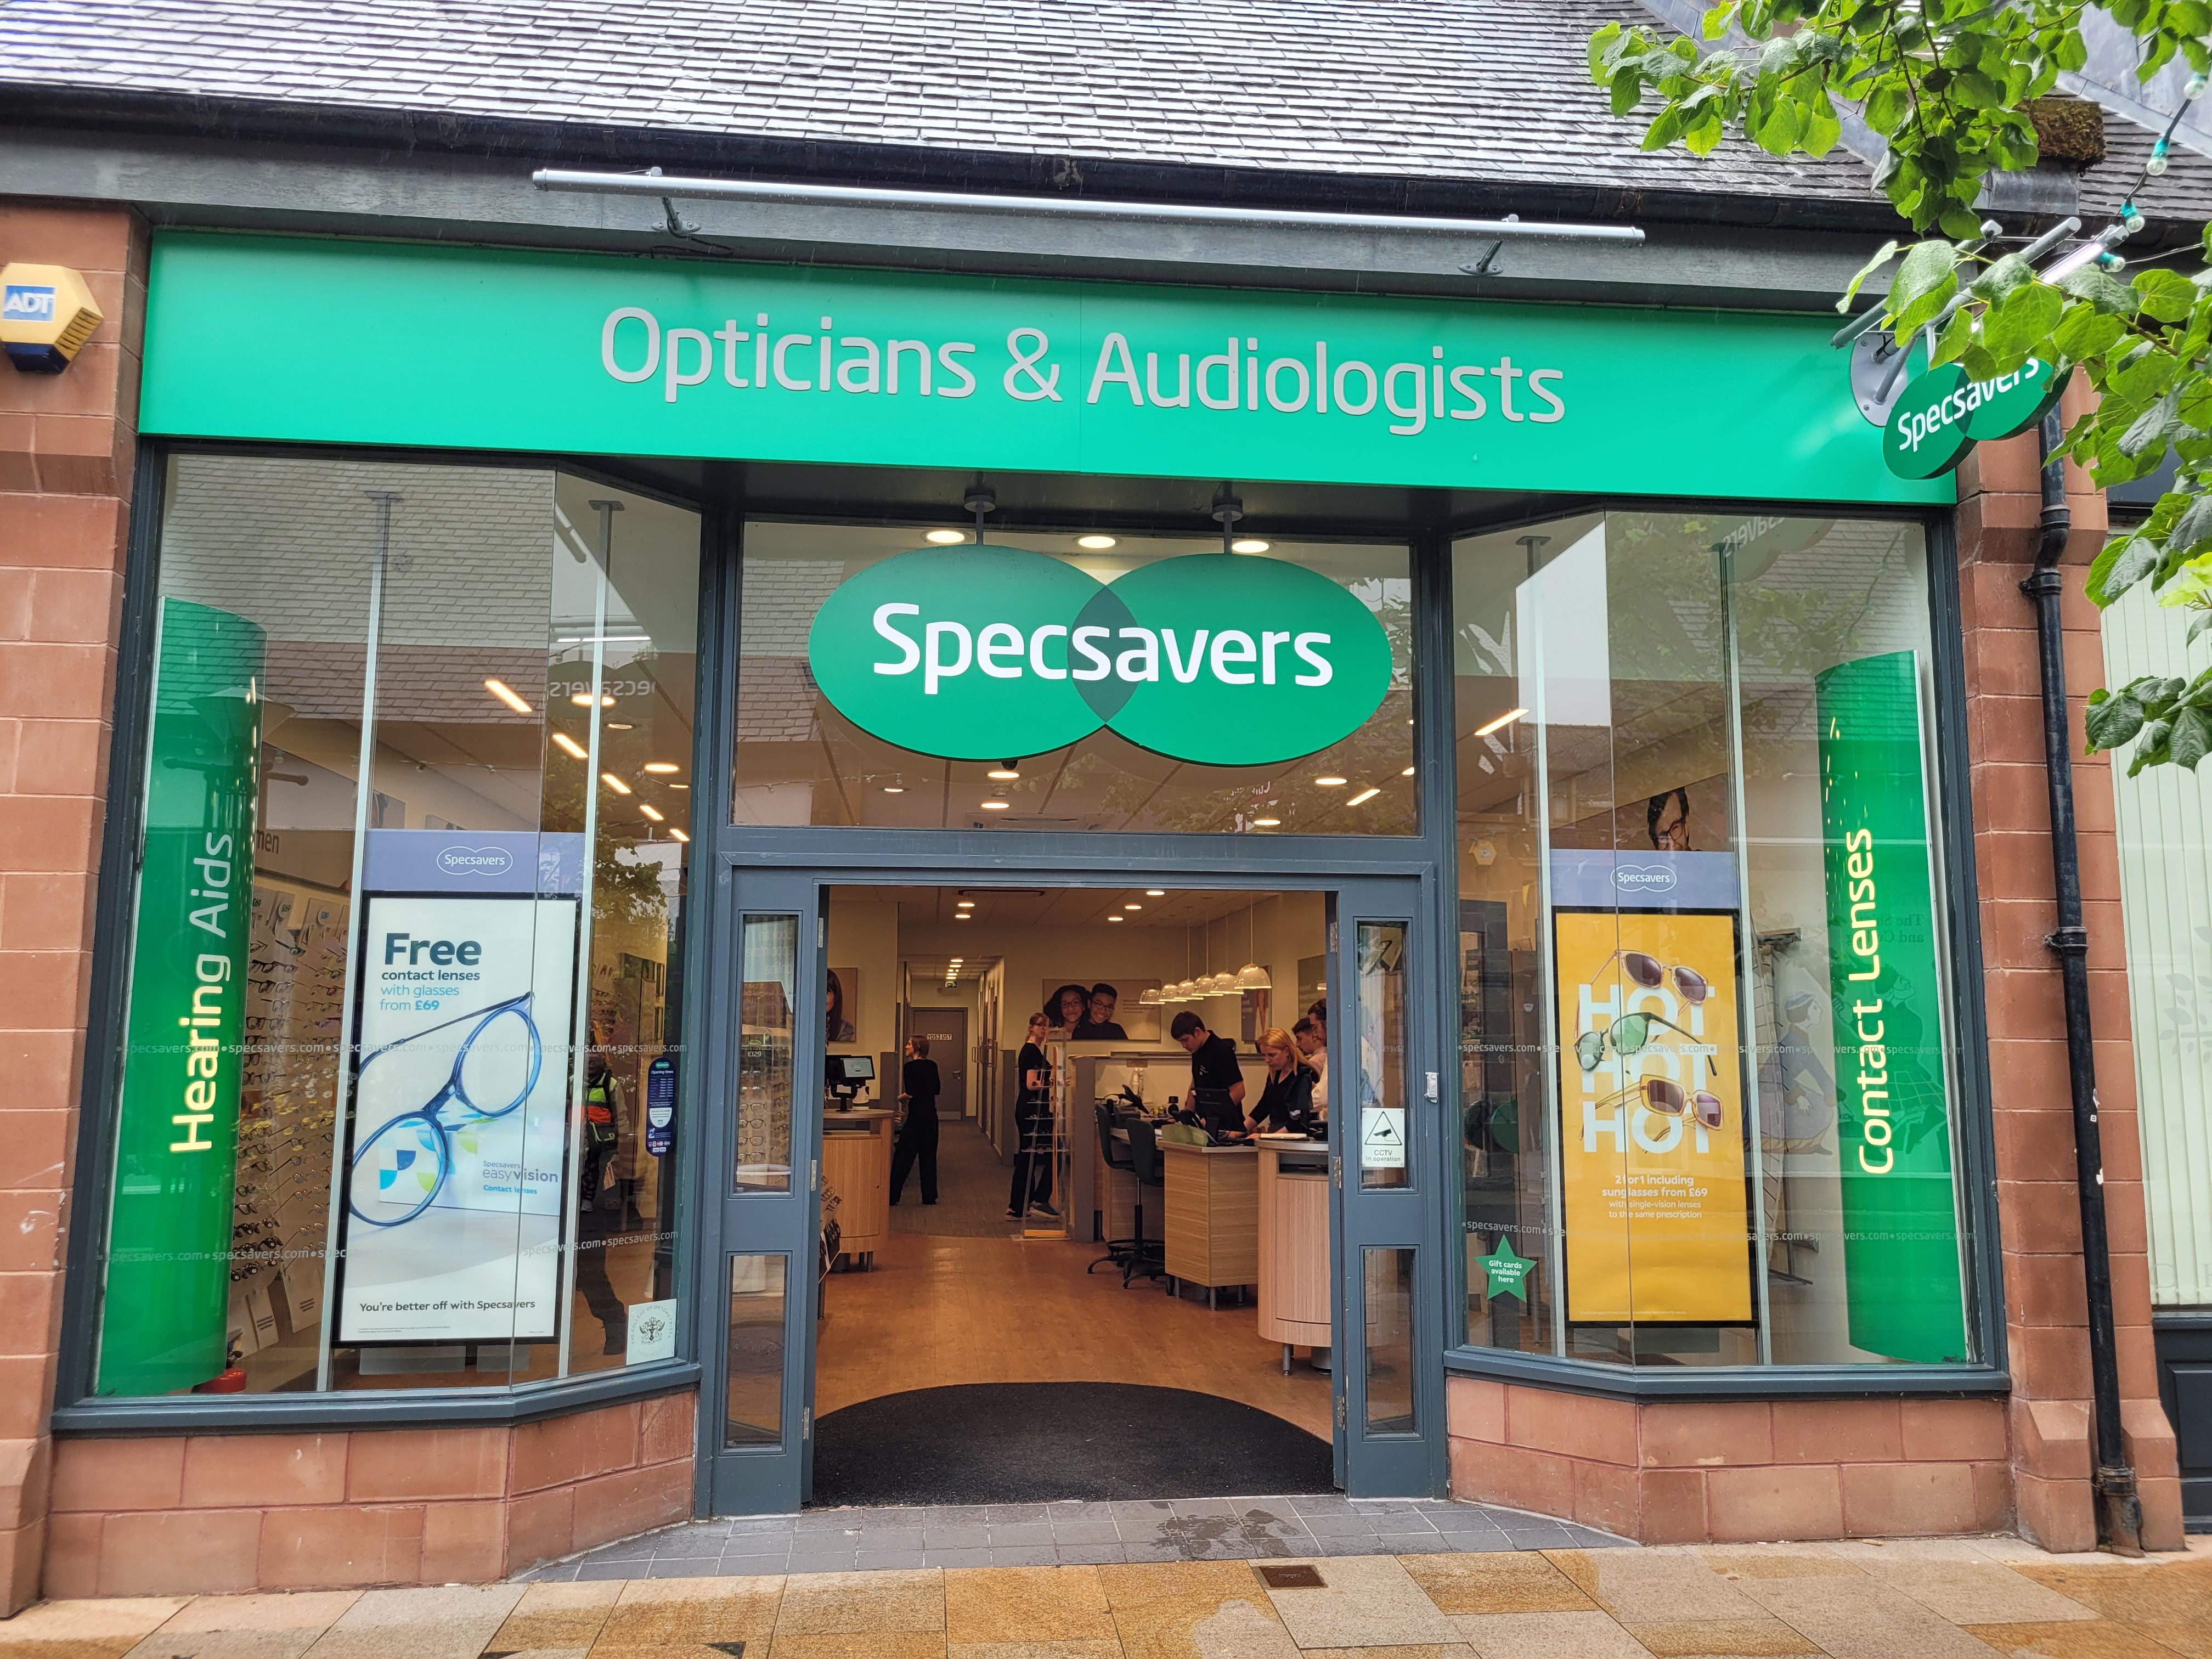 Images Specsavers Opticians and Audiologists - Galashiels